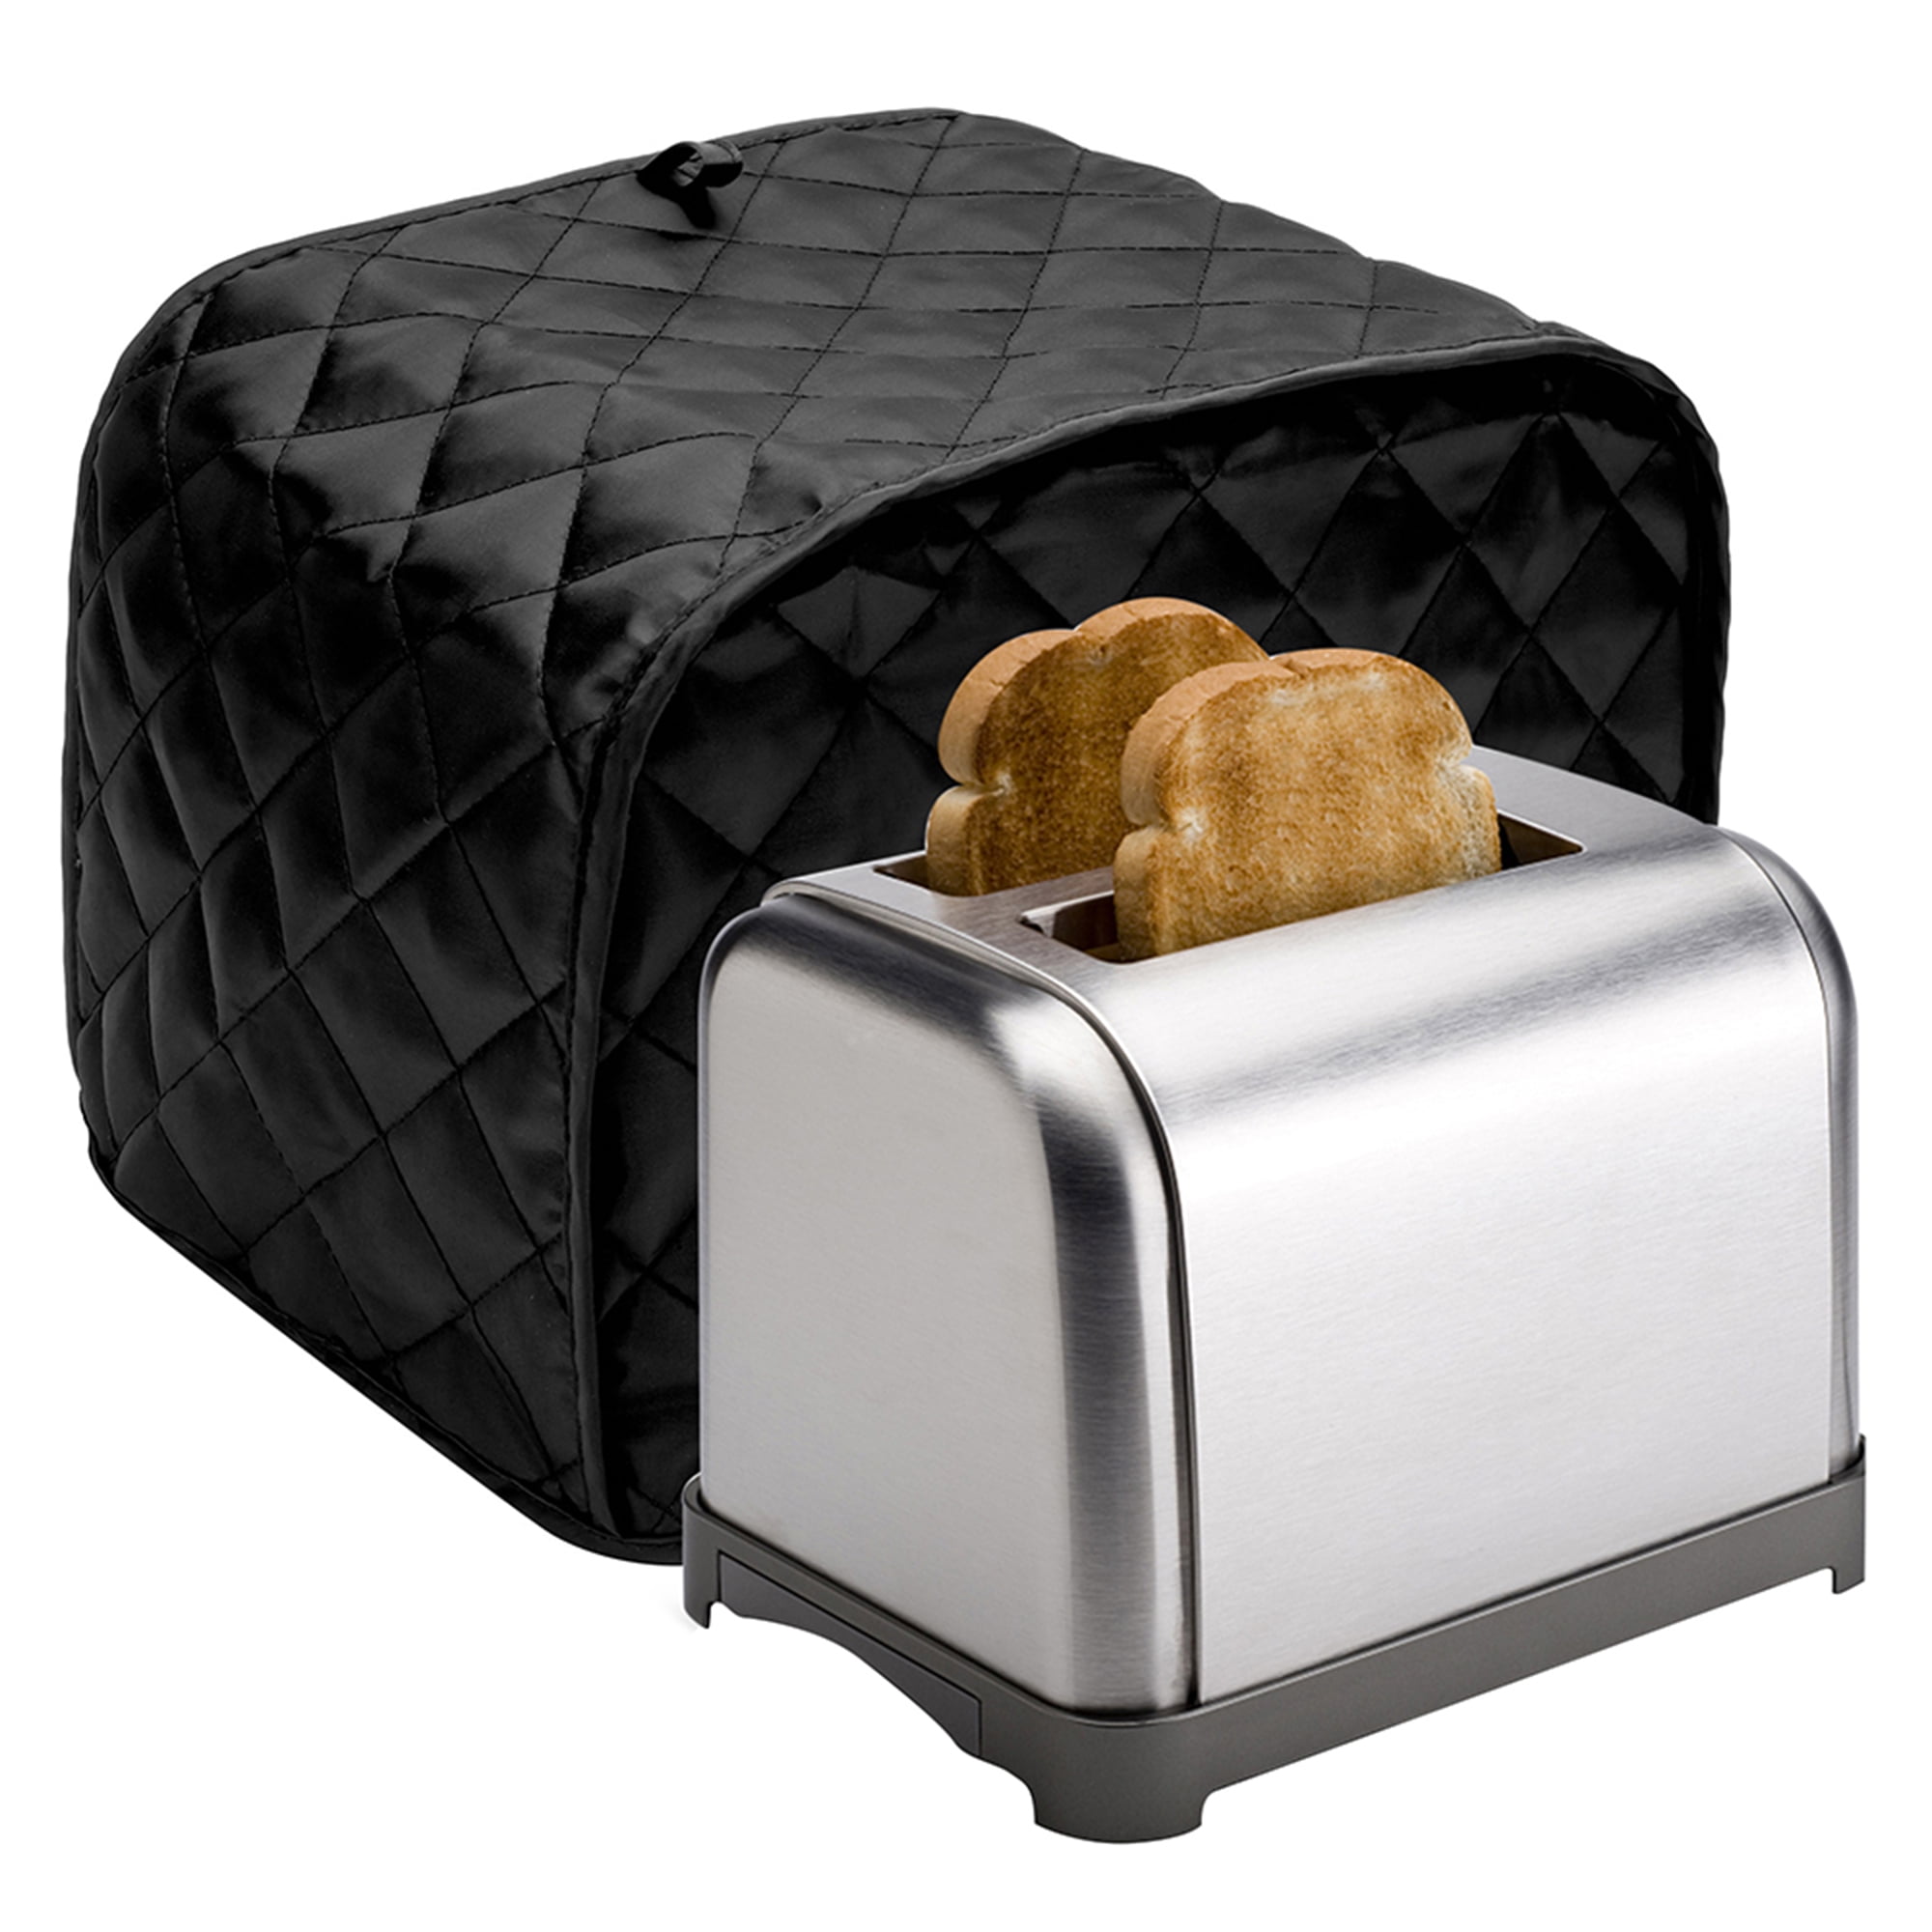 2 Slice Toaster Cover, Polyester Toaster Cover Toaster and Dust & Fingerprint Protection11